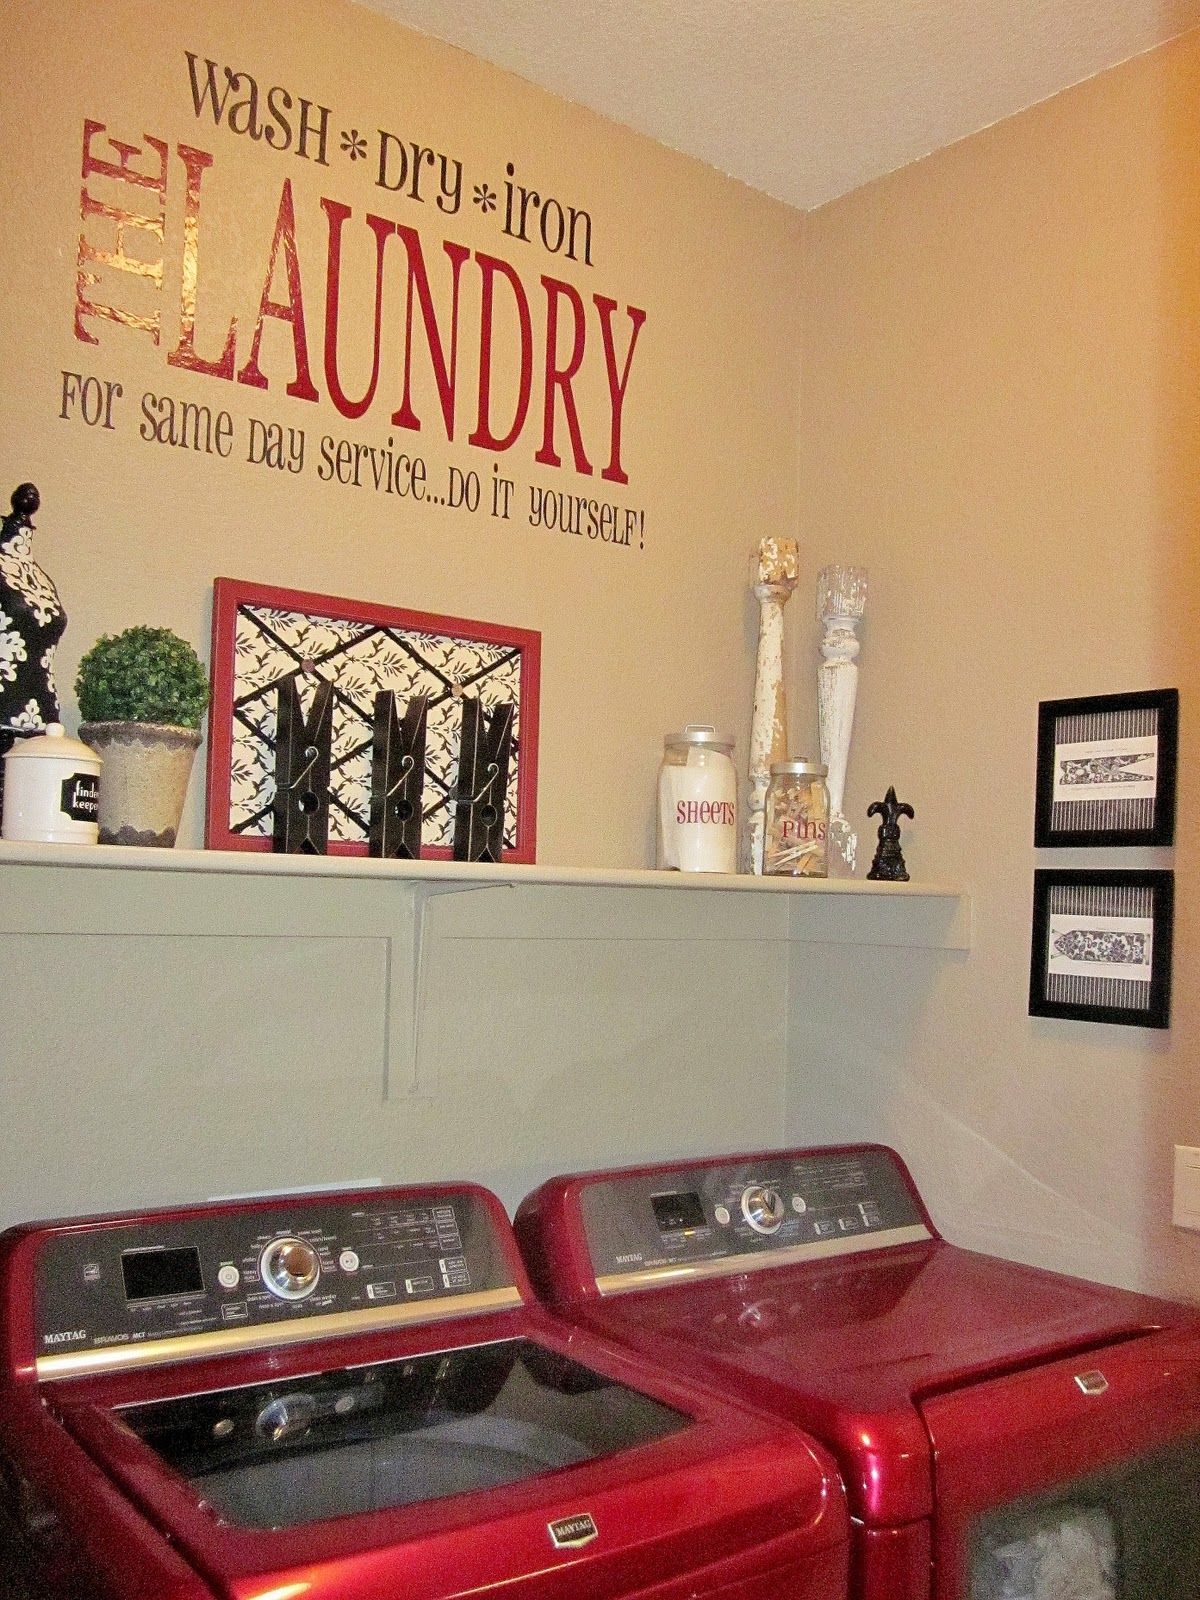 pictures of laundry rooms | Laundry Room Decorations (on NO budget)…i WANT